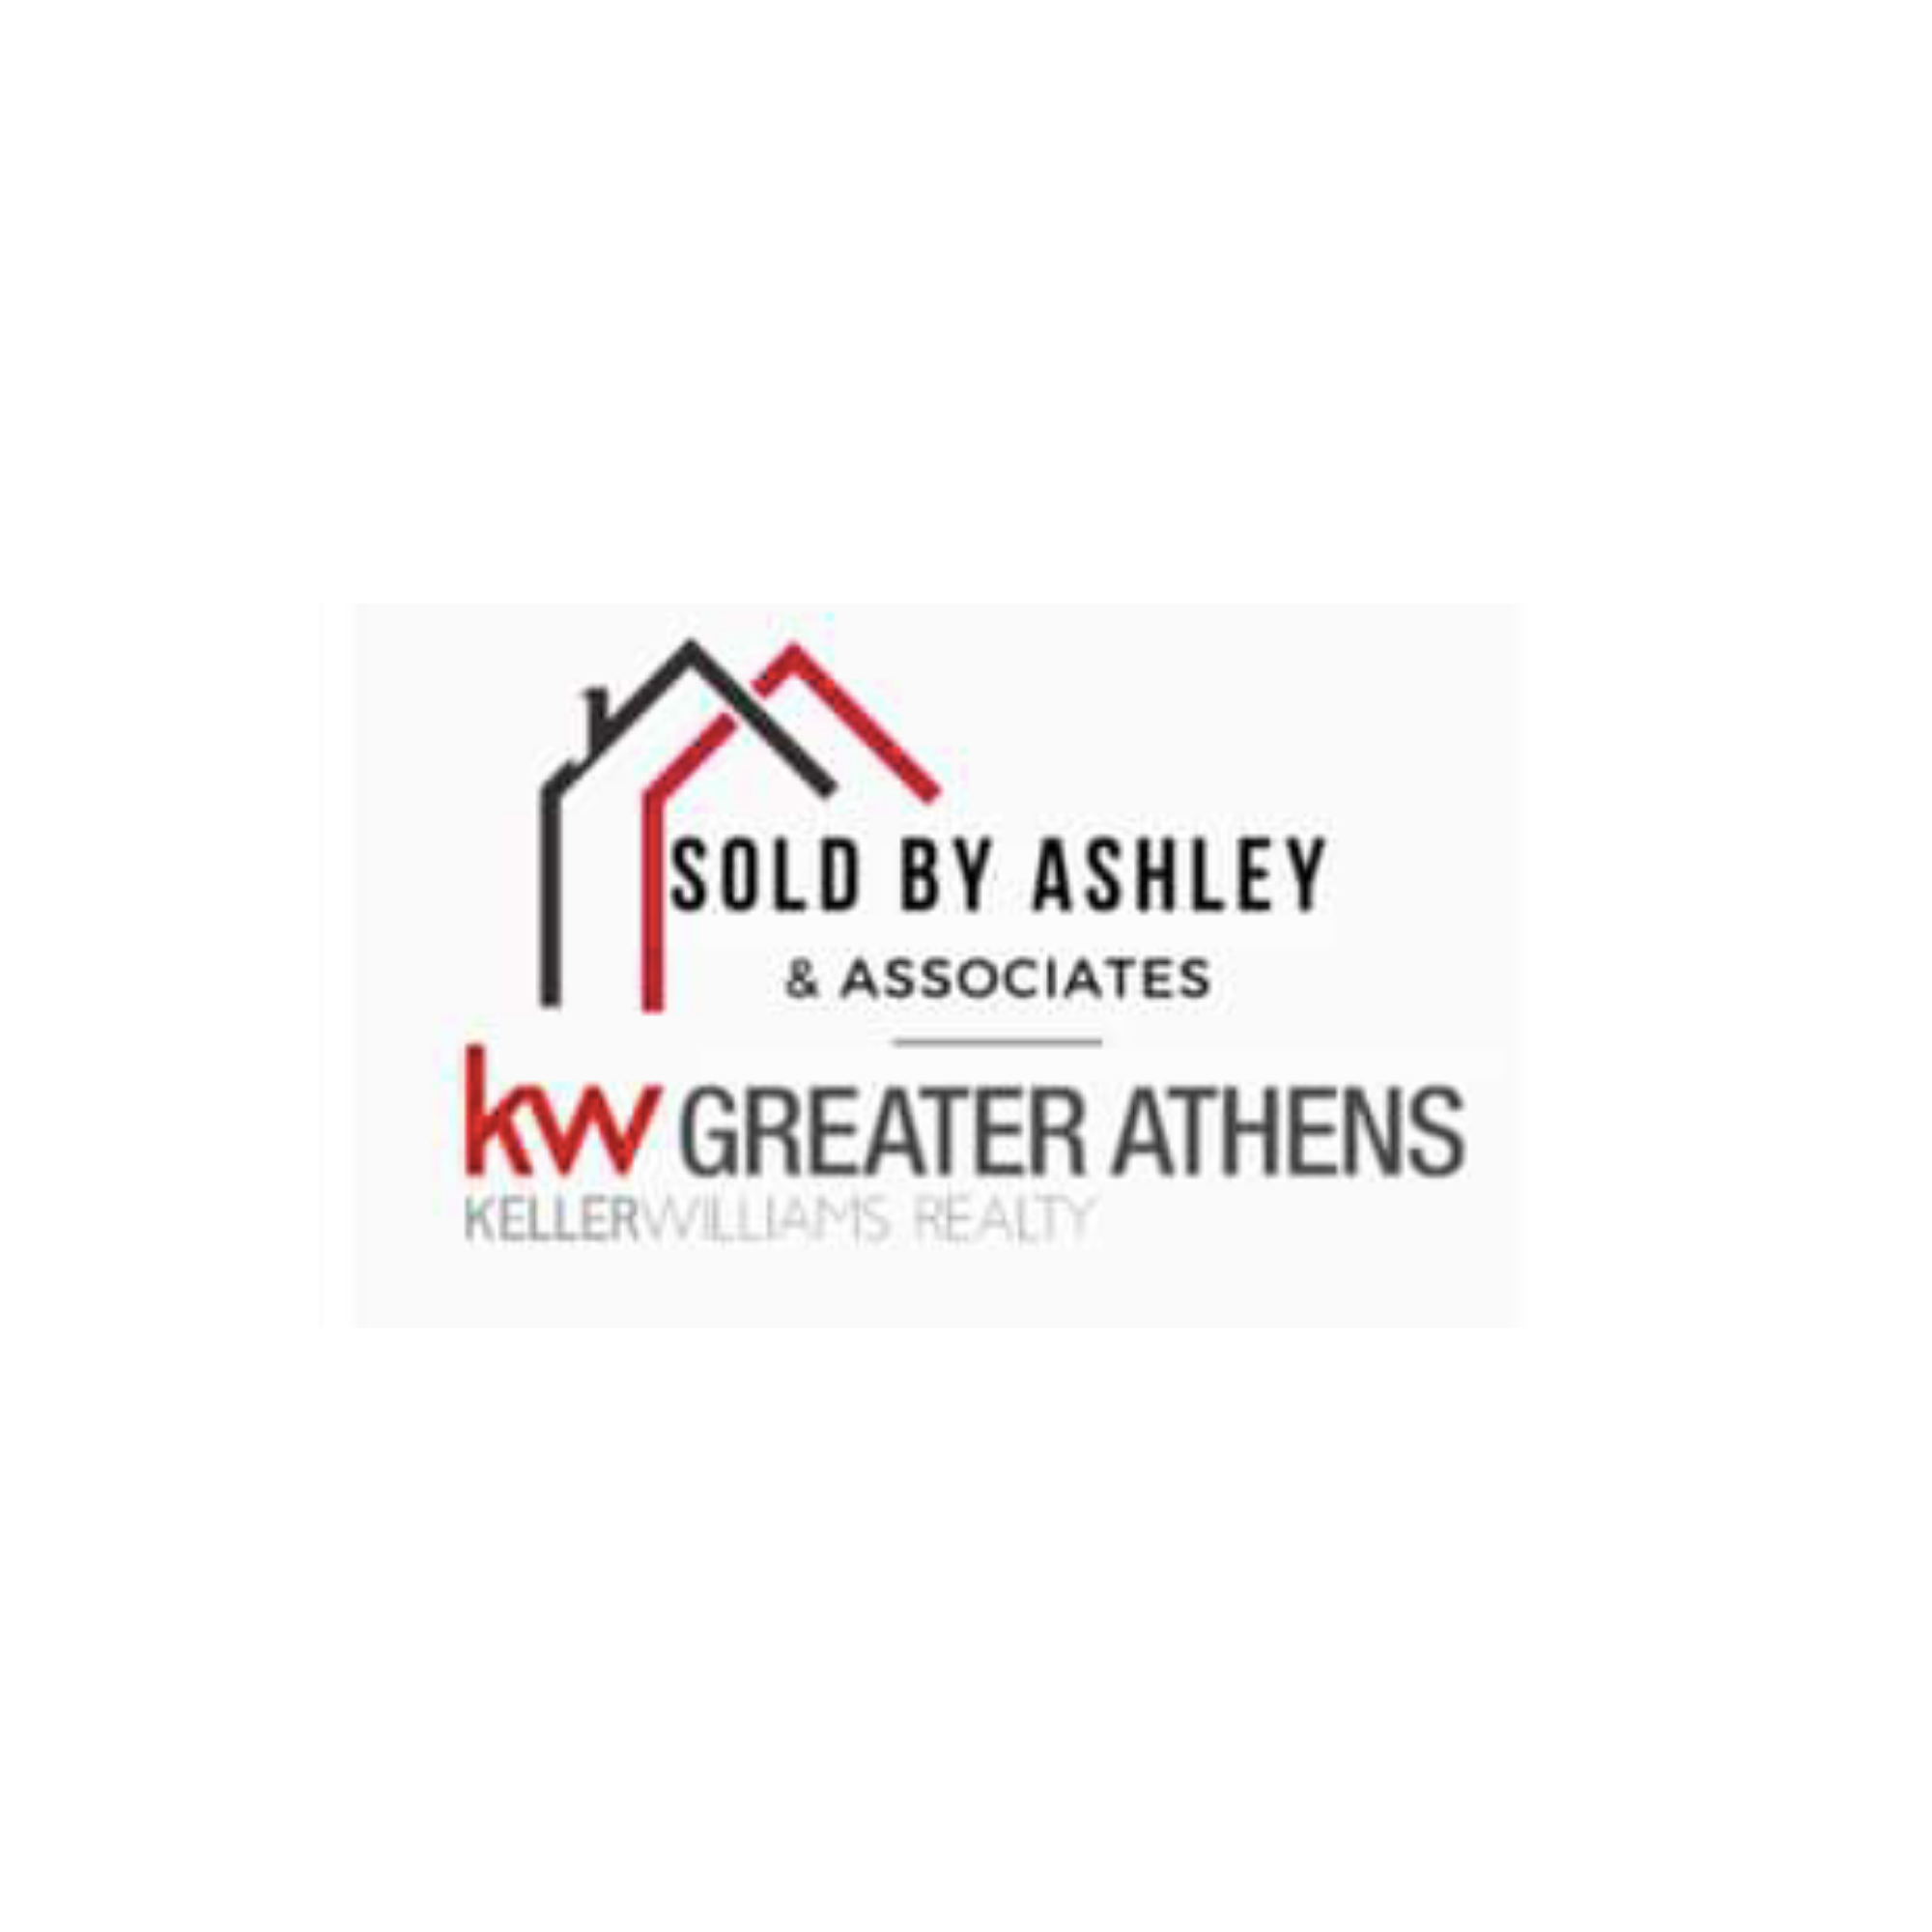 a logo for a real estate company sold by ashley & associates